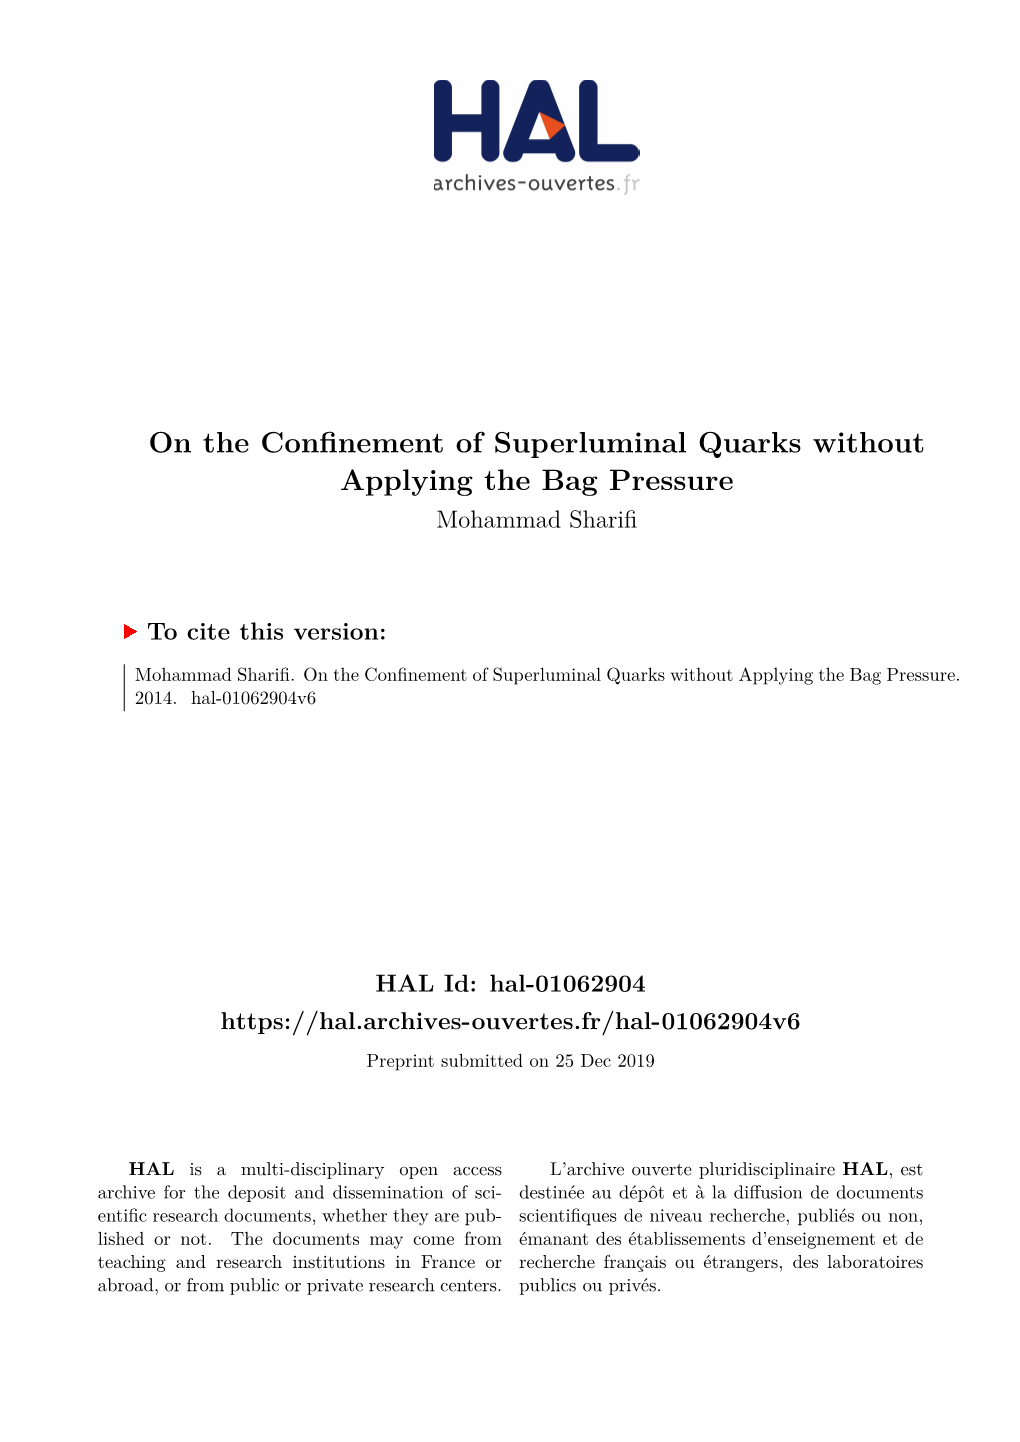 On the Confinement of Superluminal Quarks Without Applying the Bag Pressure Mohammad Sharifi